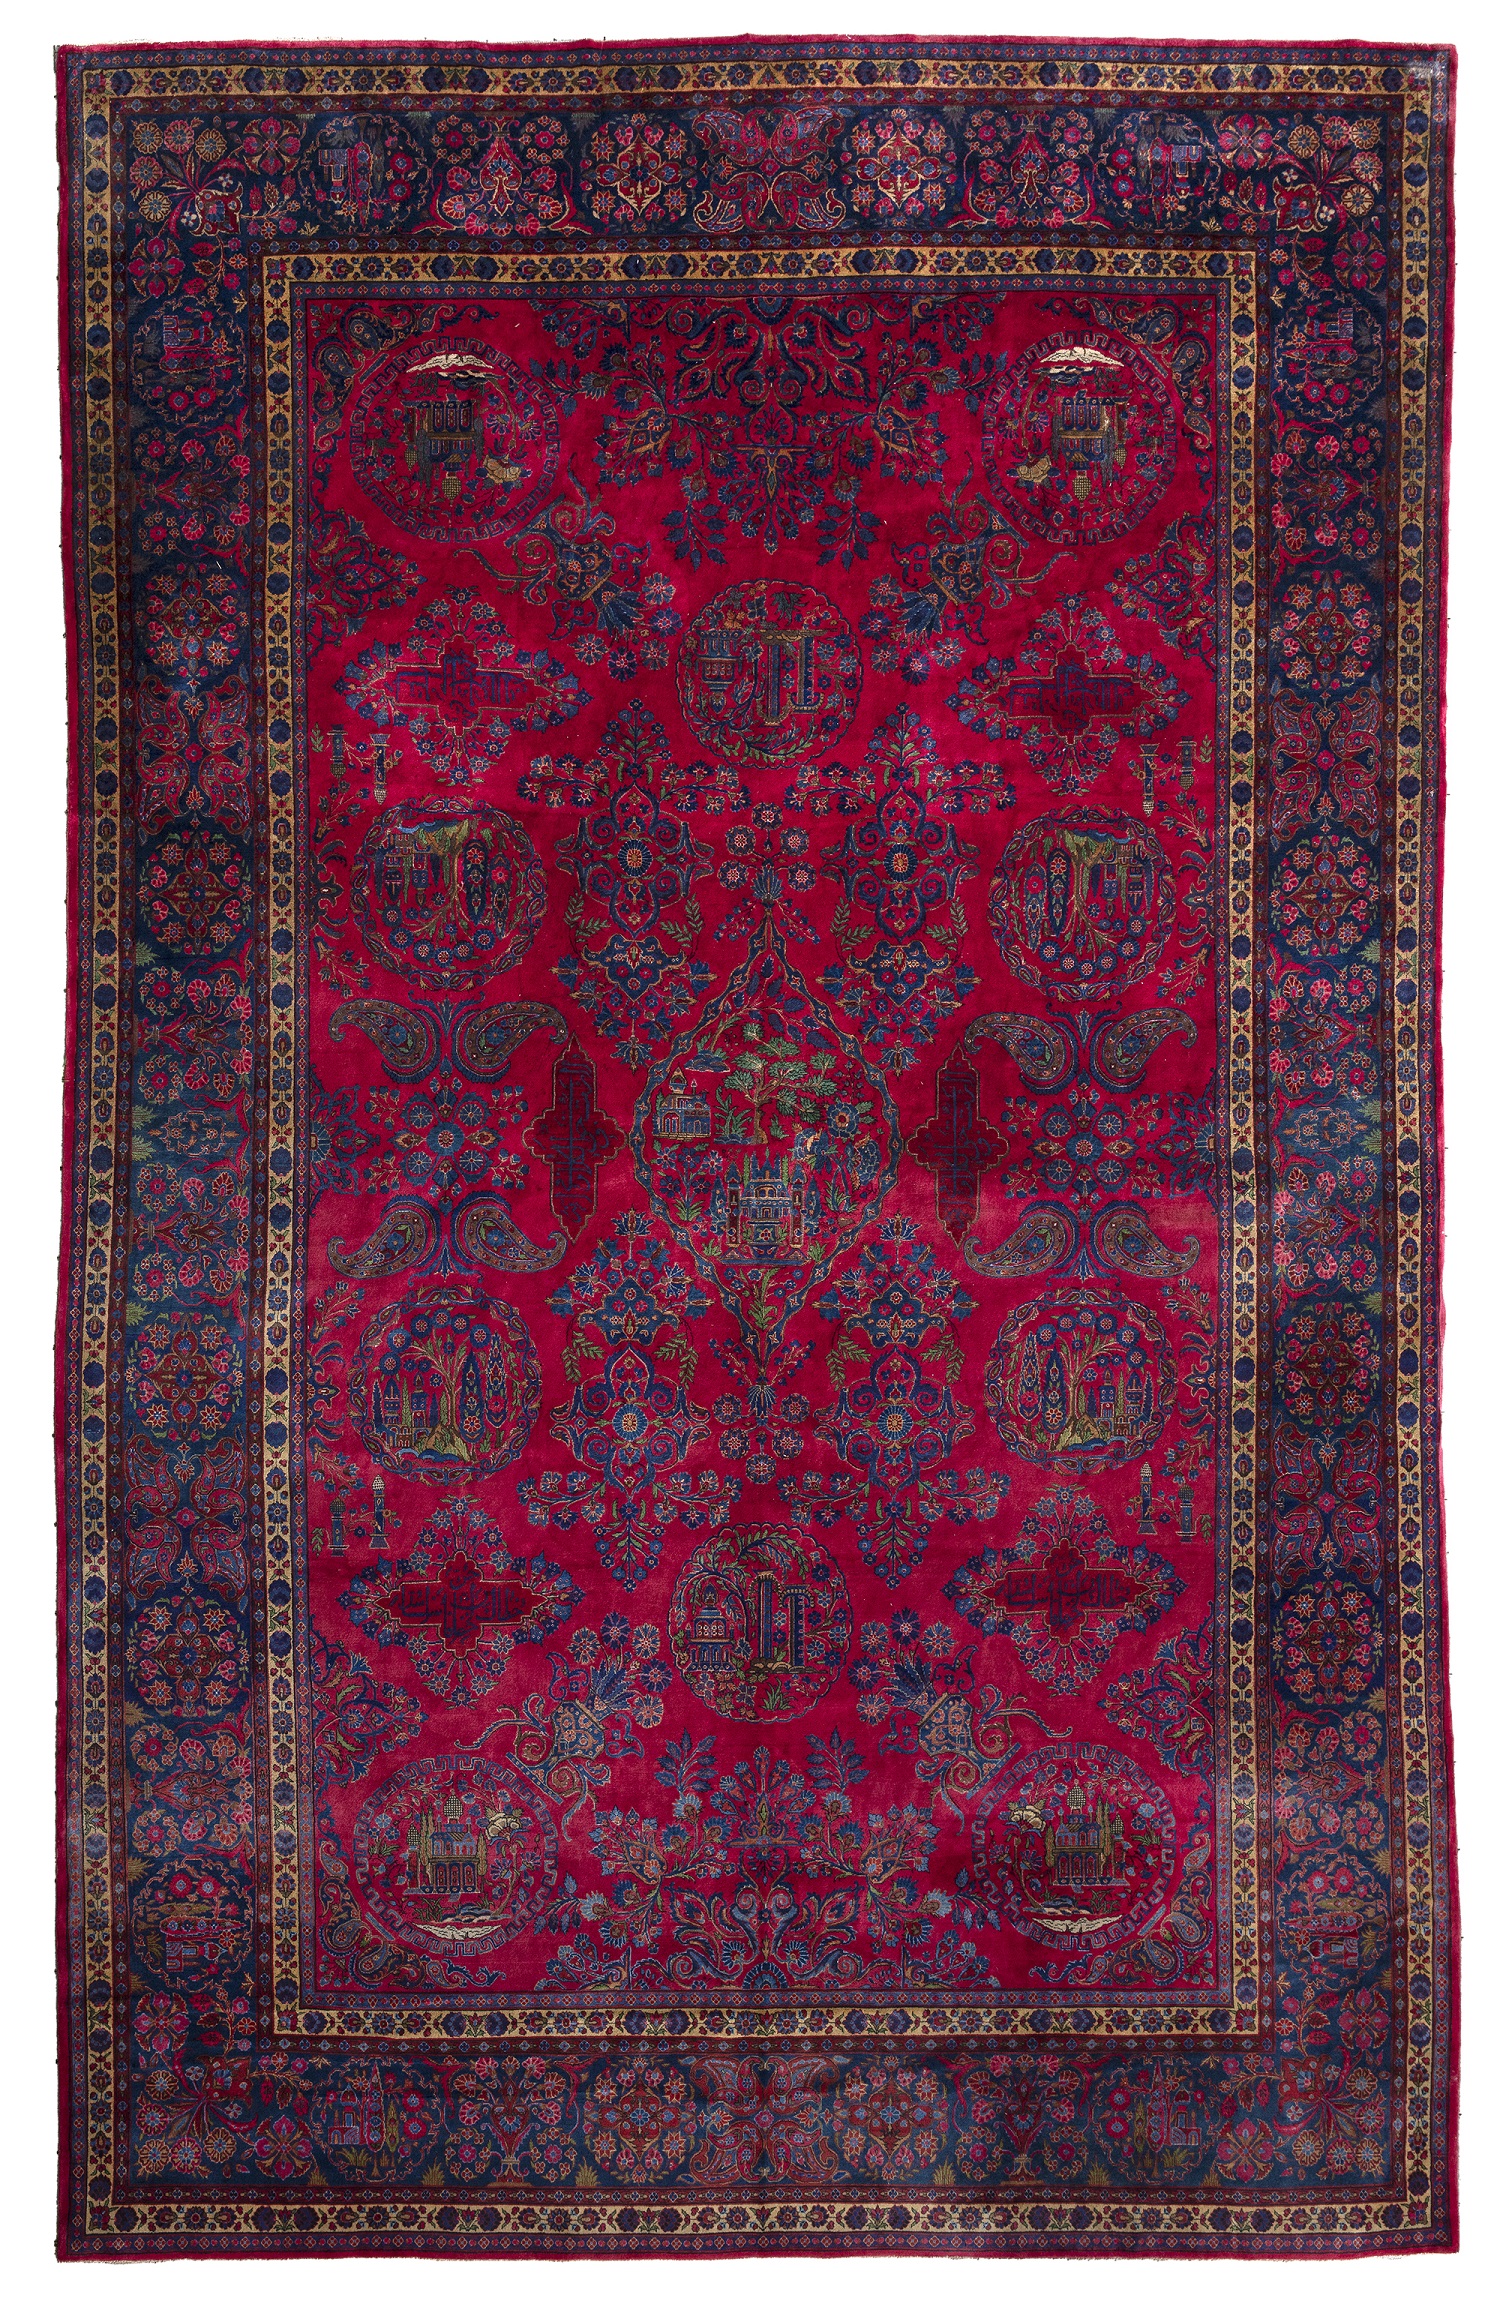 A PERSIAN KASHAN CARPET, EARLY 20TH CENTURY